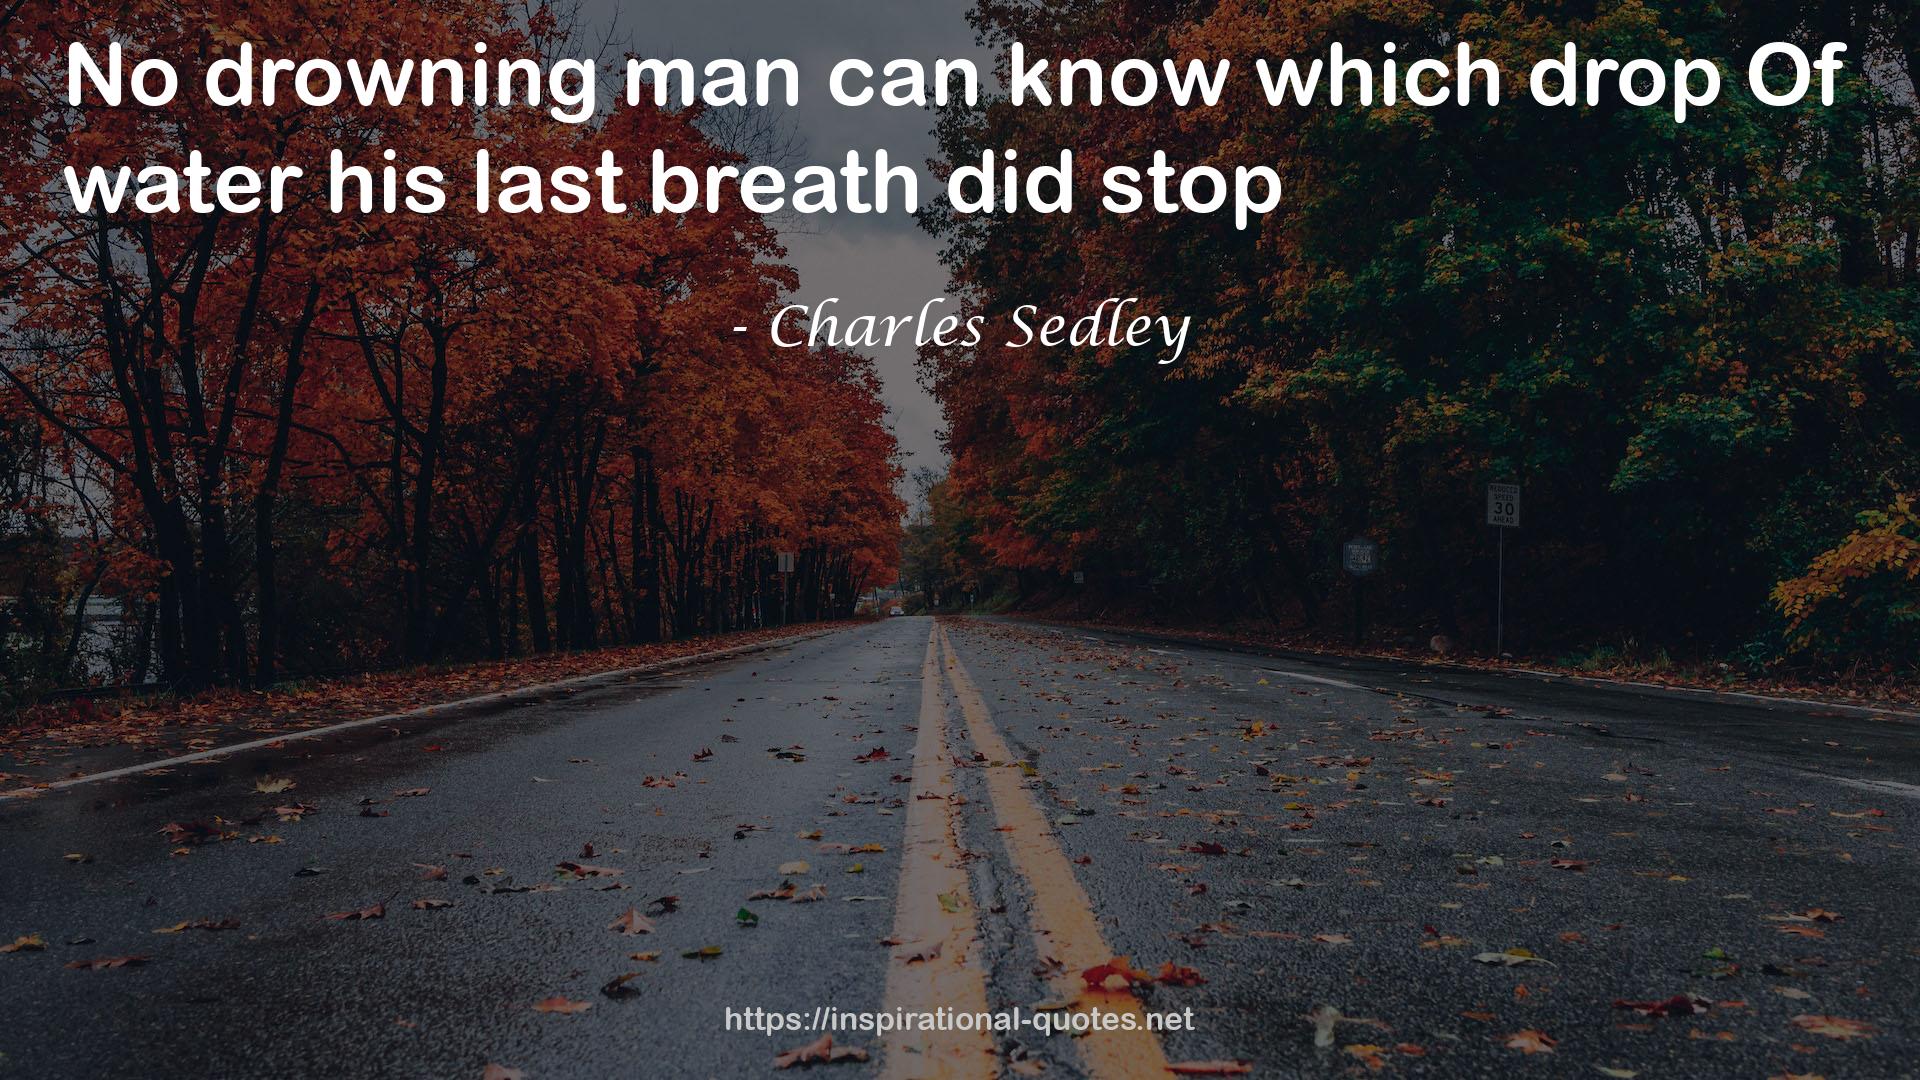 Charles Sedley QUOTES